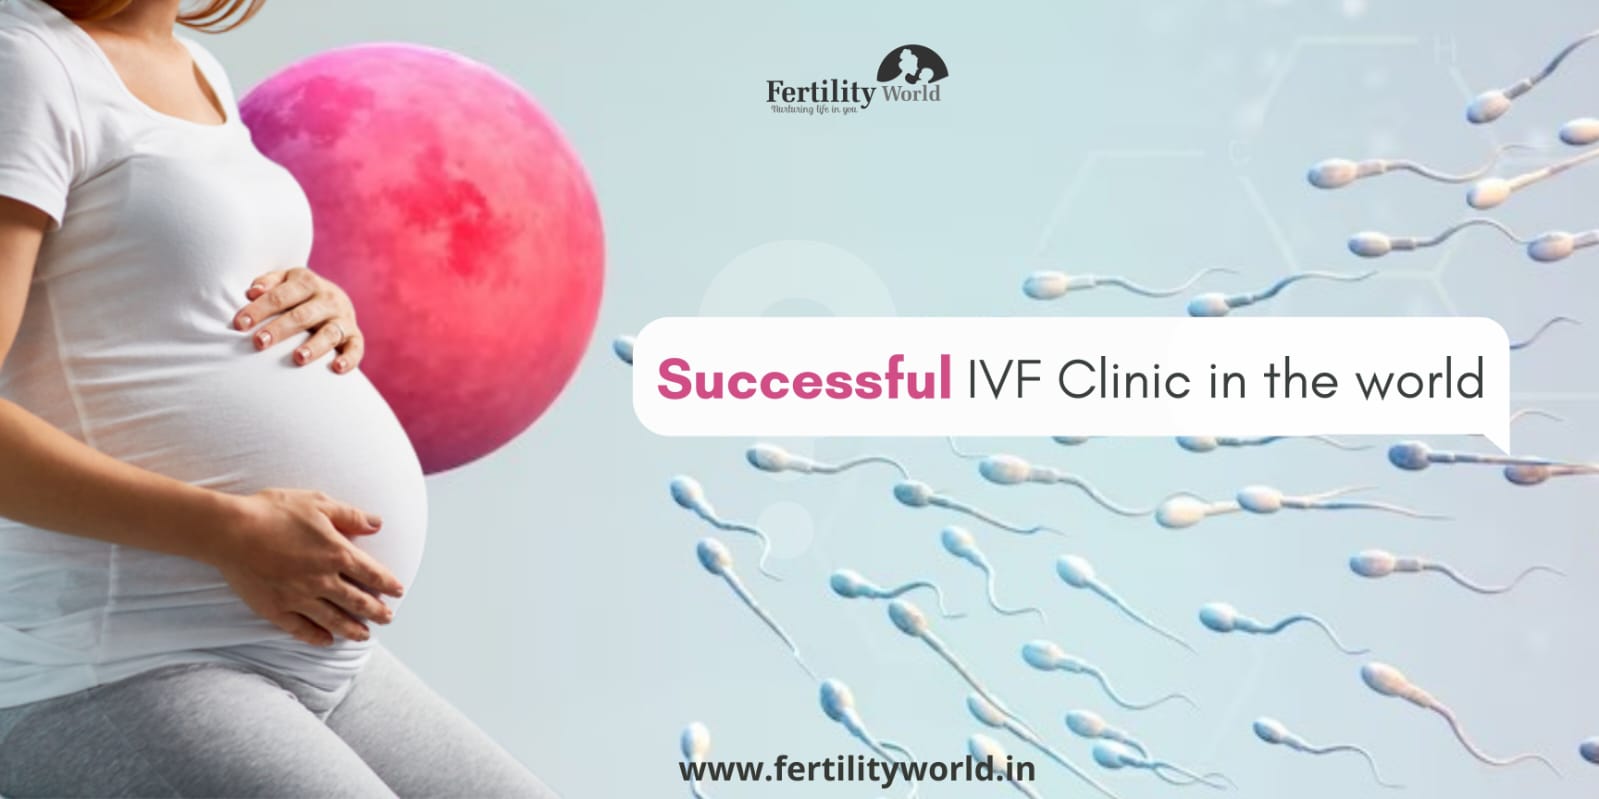 Where is the most successful IVF clinic in the world?